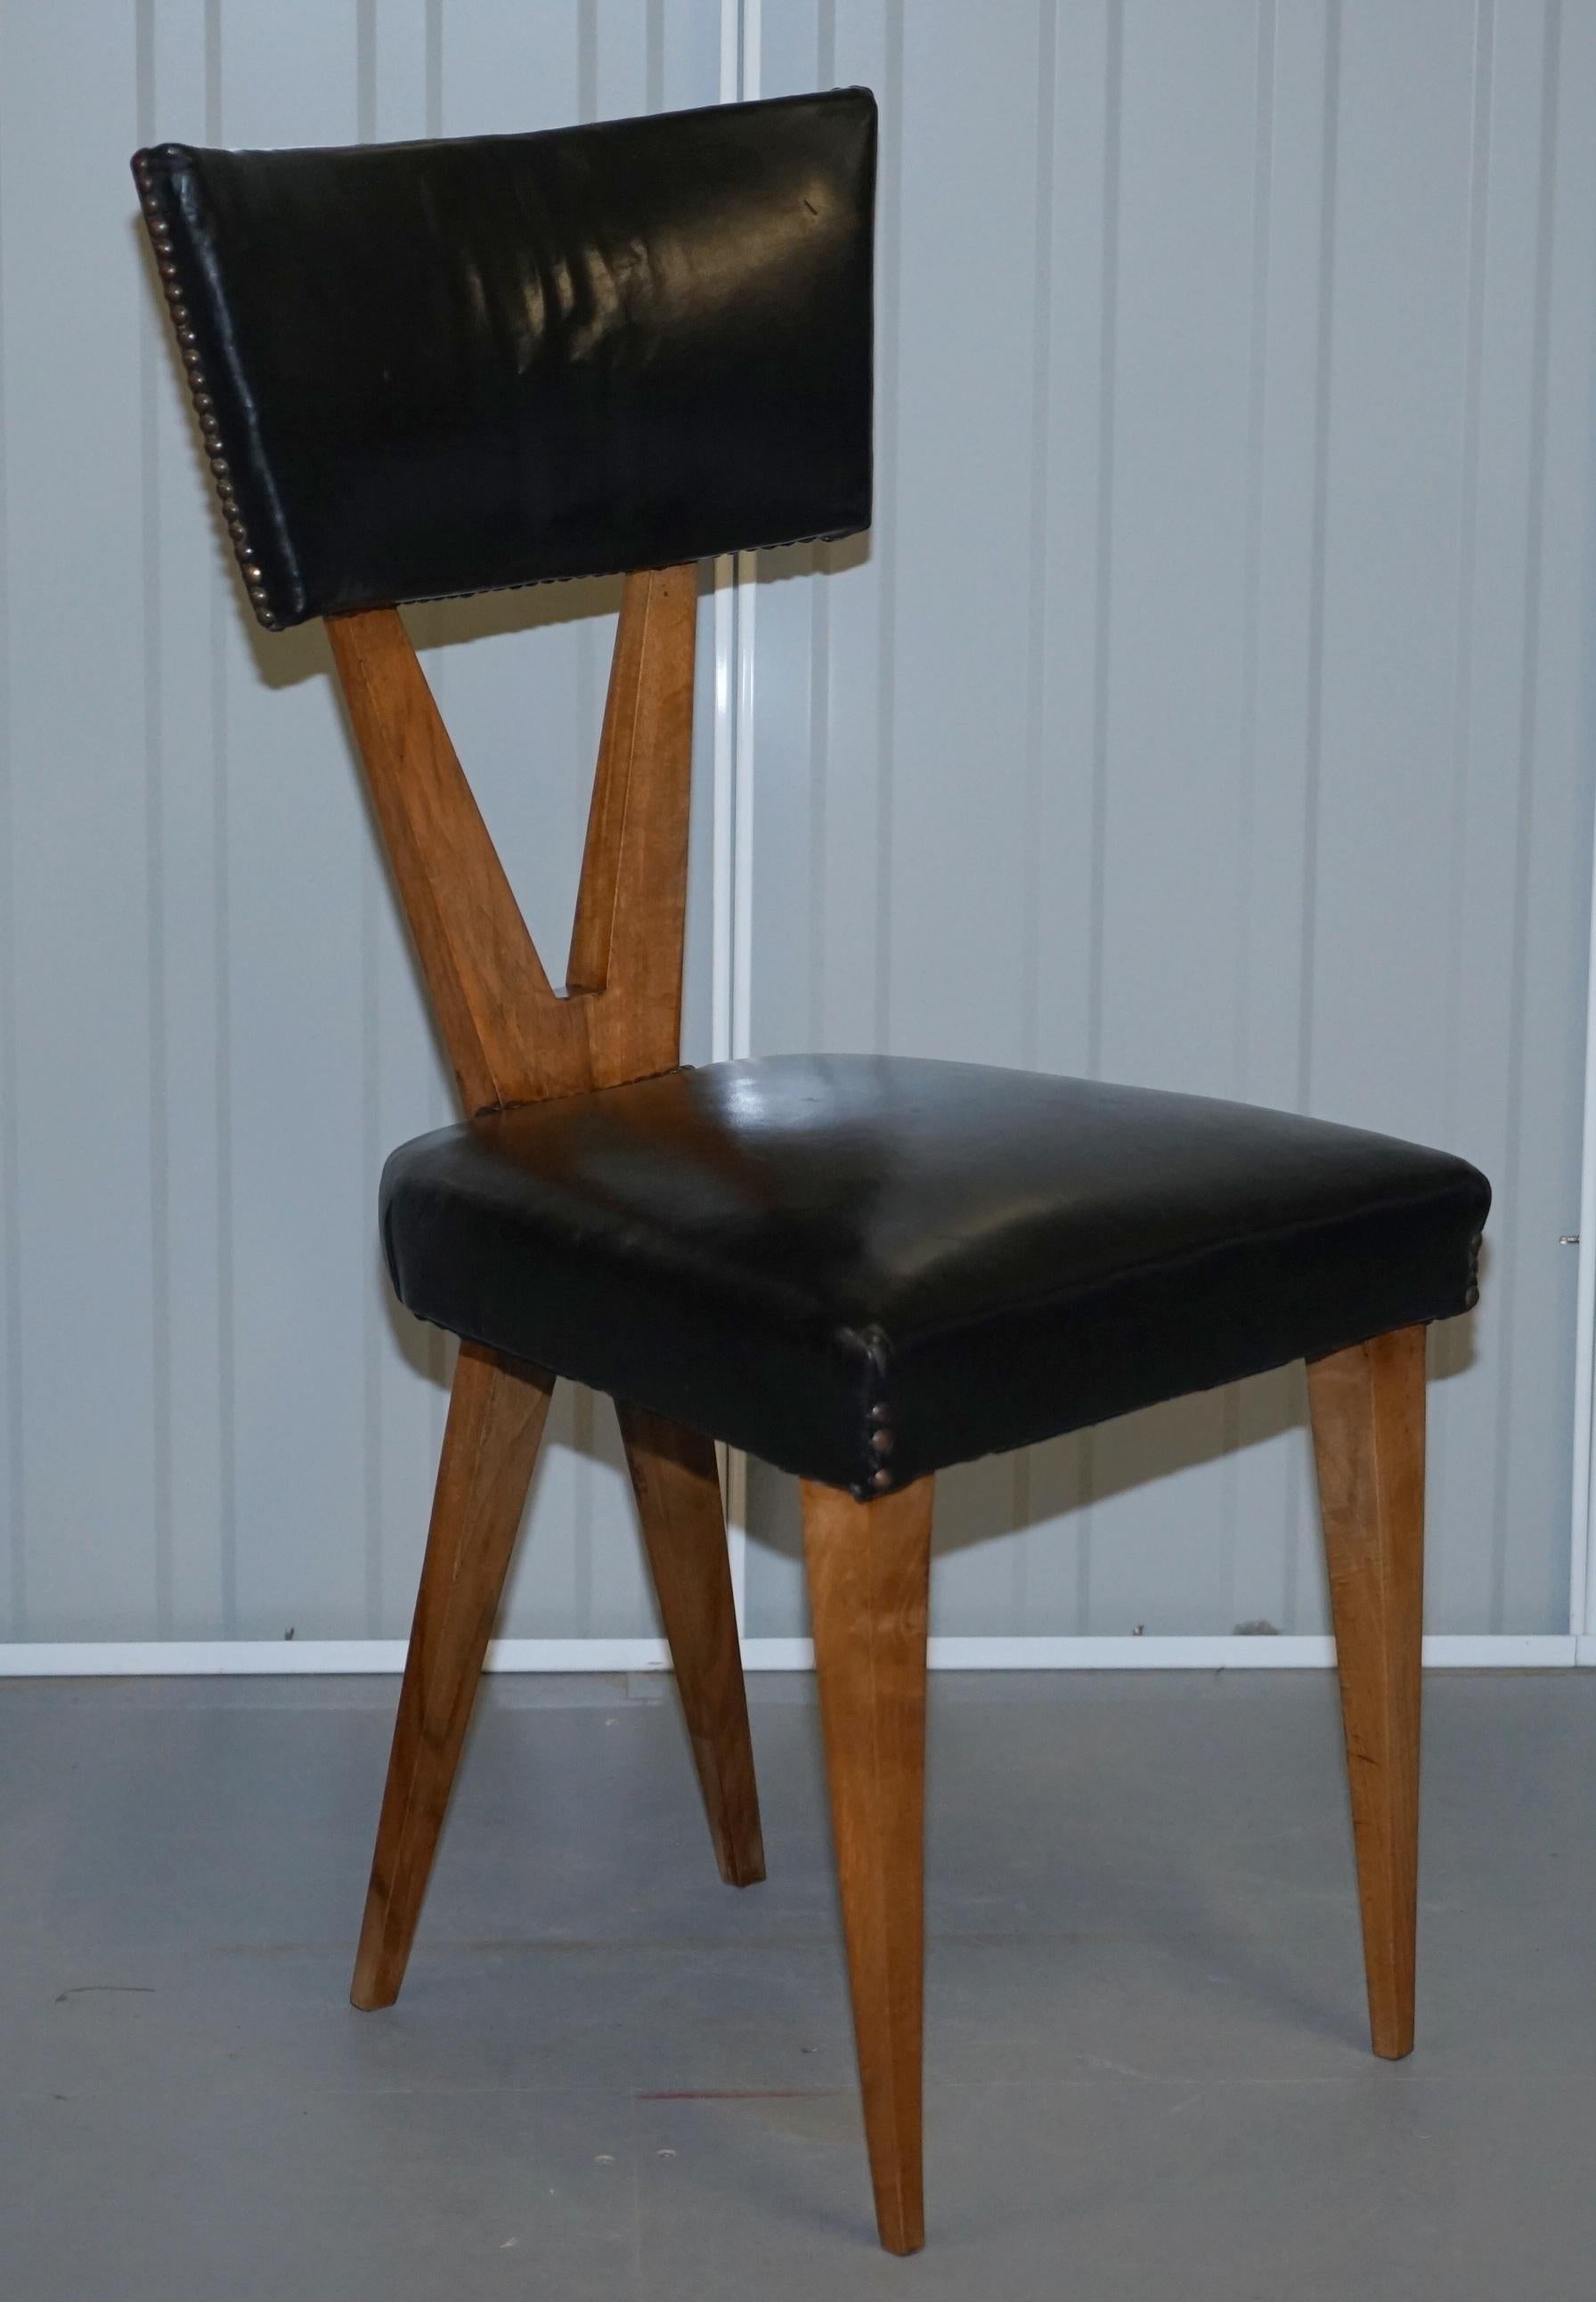 We are delighted to offer for sale this very rare set of circa 1950 Italian walnut and black leather Gianni Vigorelli X-framed dining chairs

An exceptionally stylish and Postmodern style set of six chairs by the wonder that was and always will be